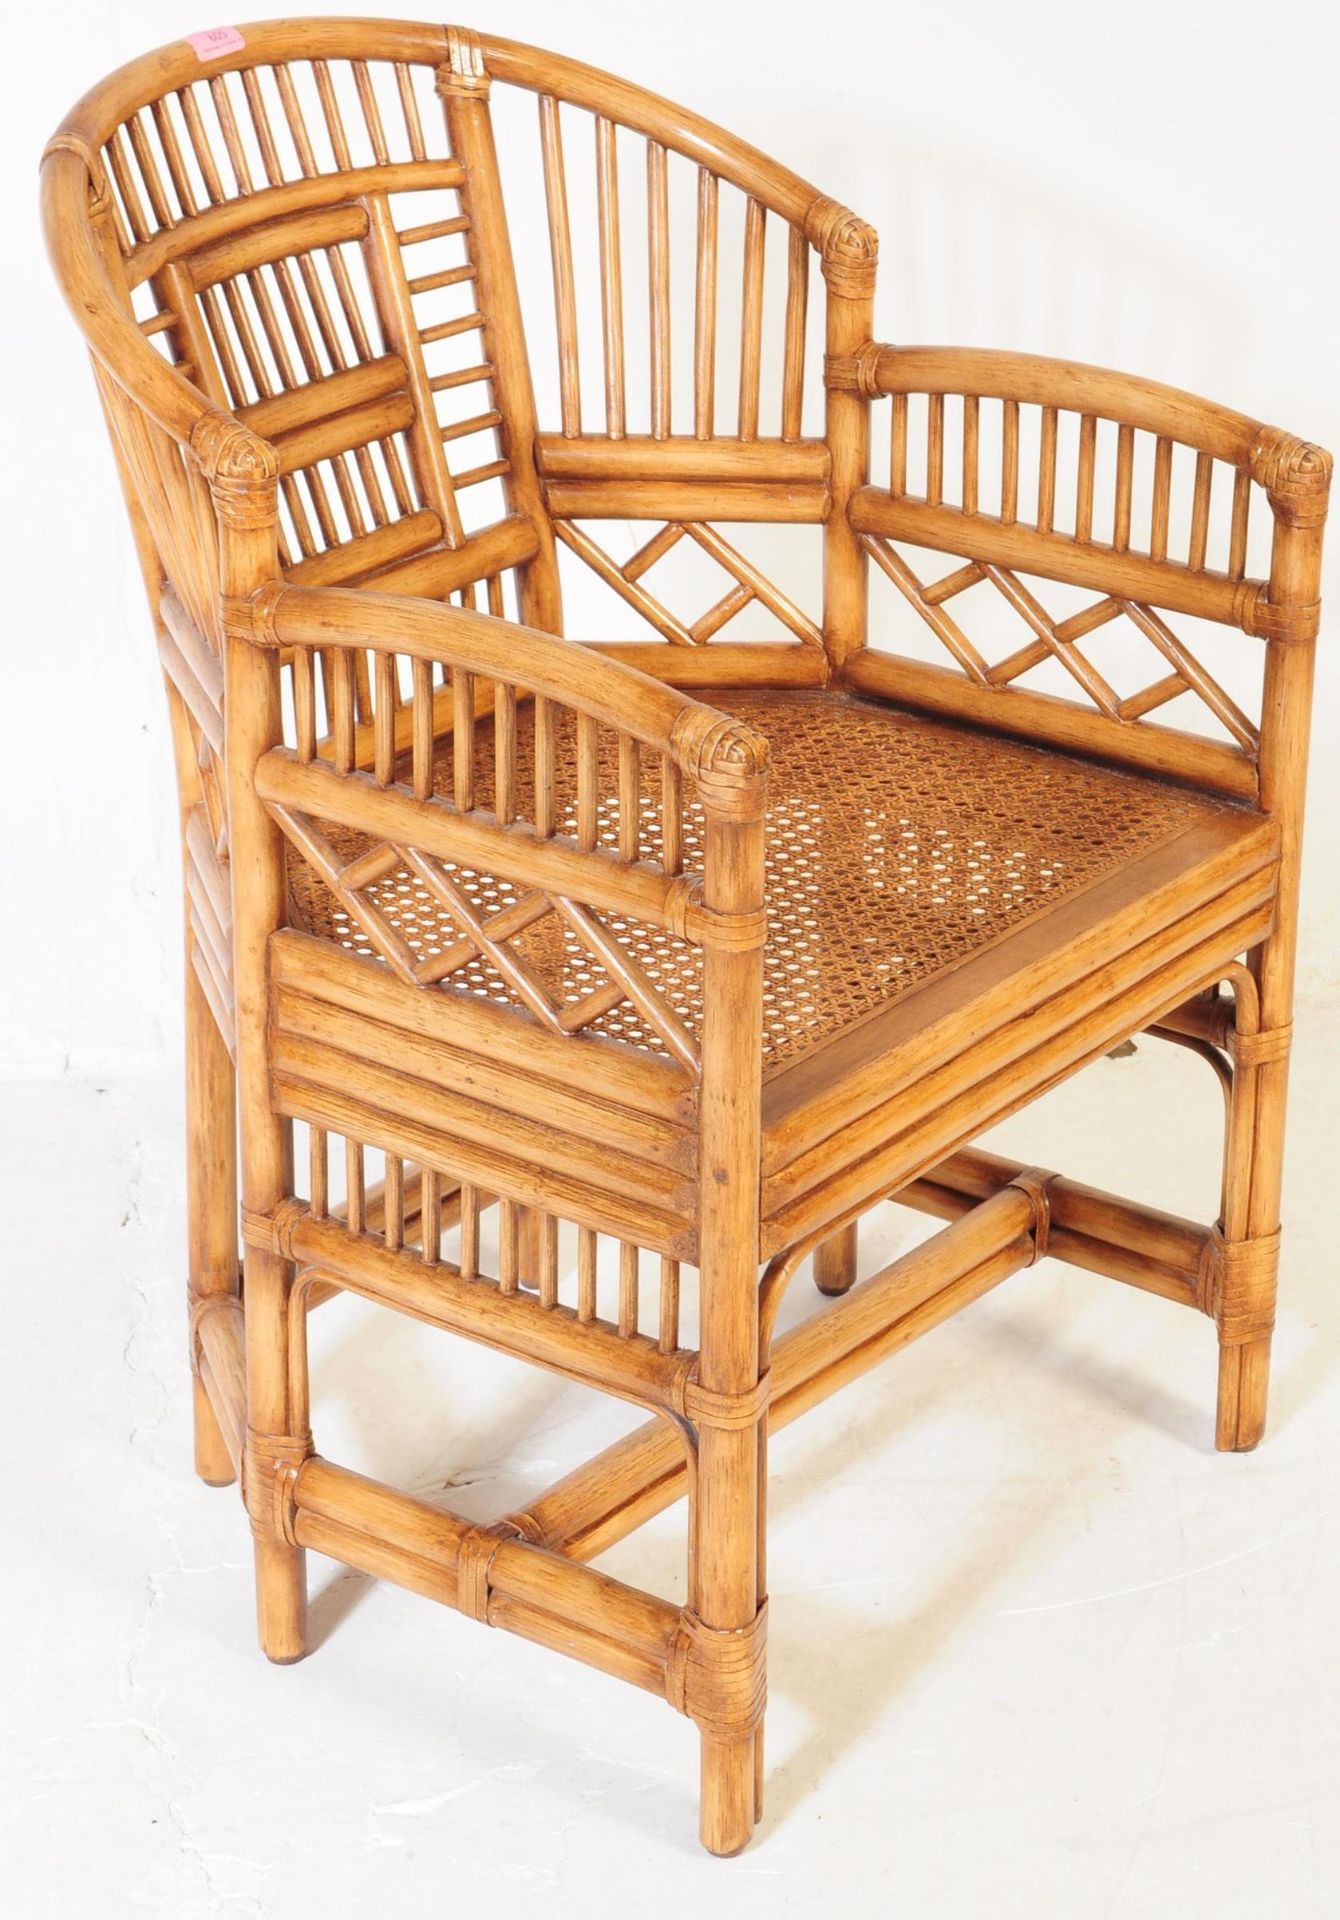 MID CENTURY 1960S BAMBOO ITALIAN STYLE CONSERVATORY CHAIR - Image 2 of 7